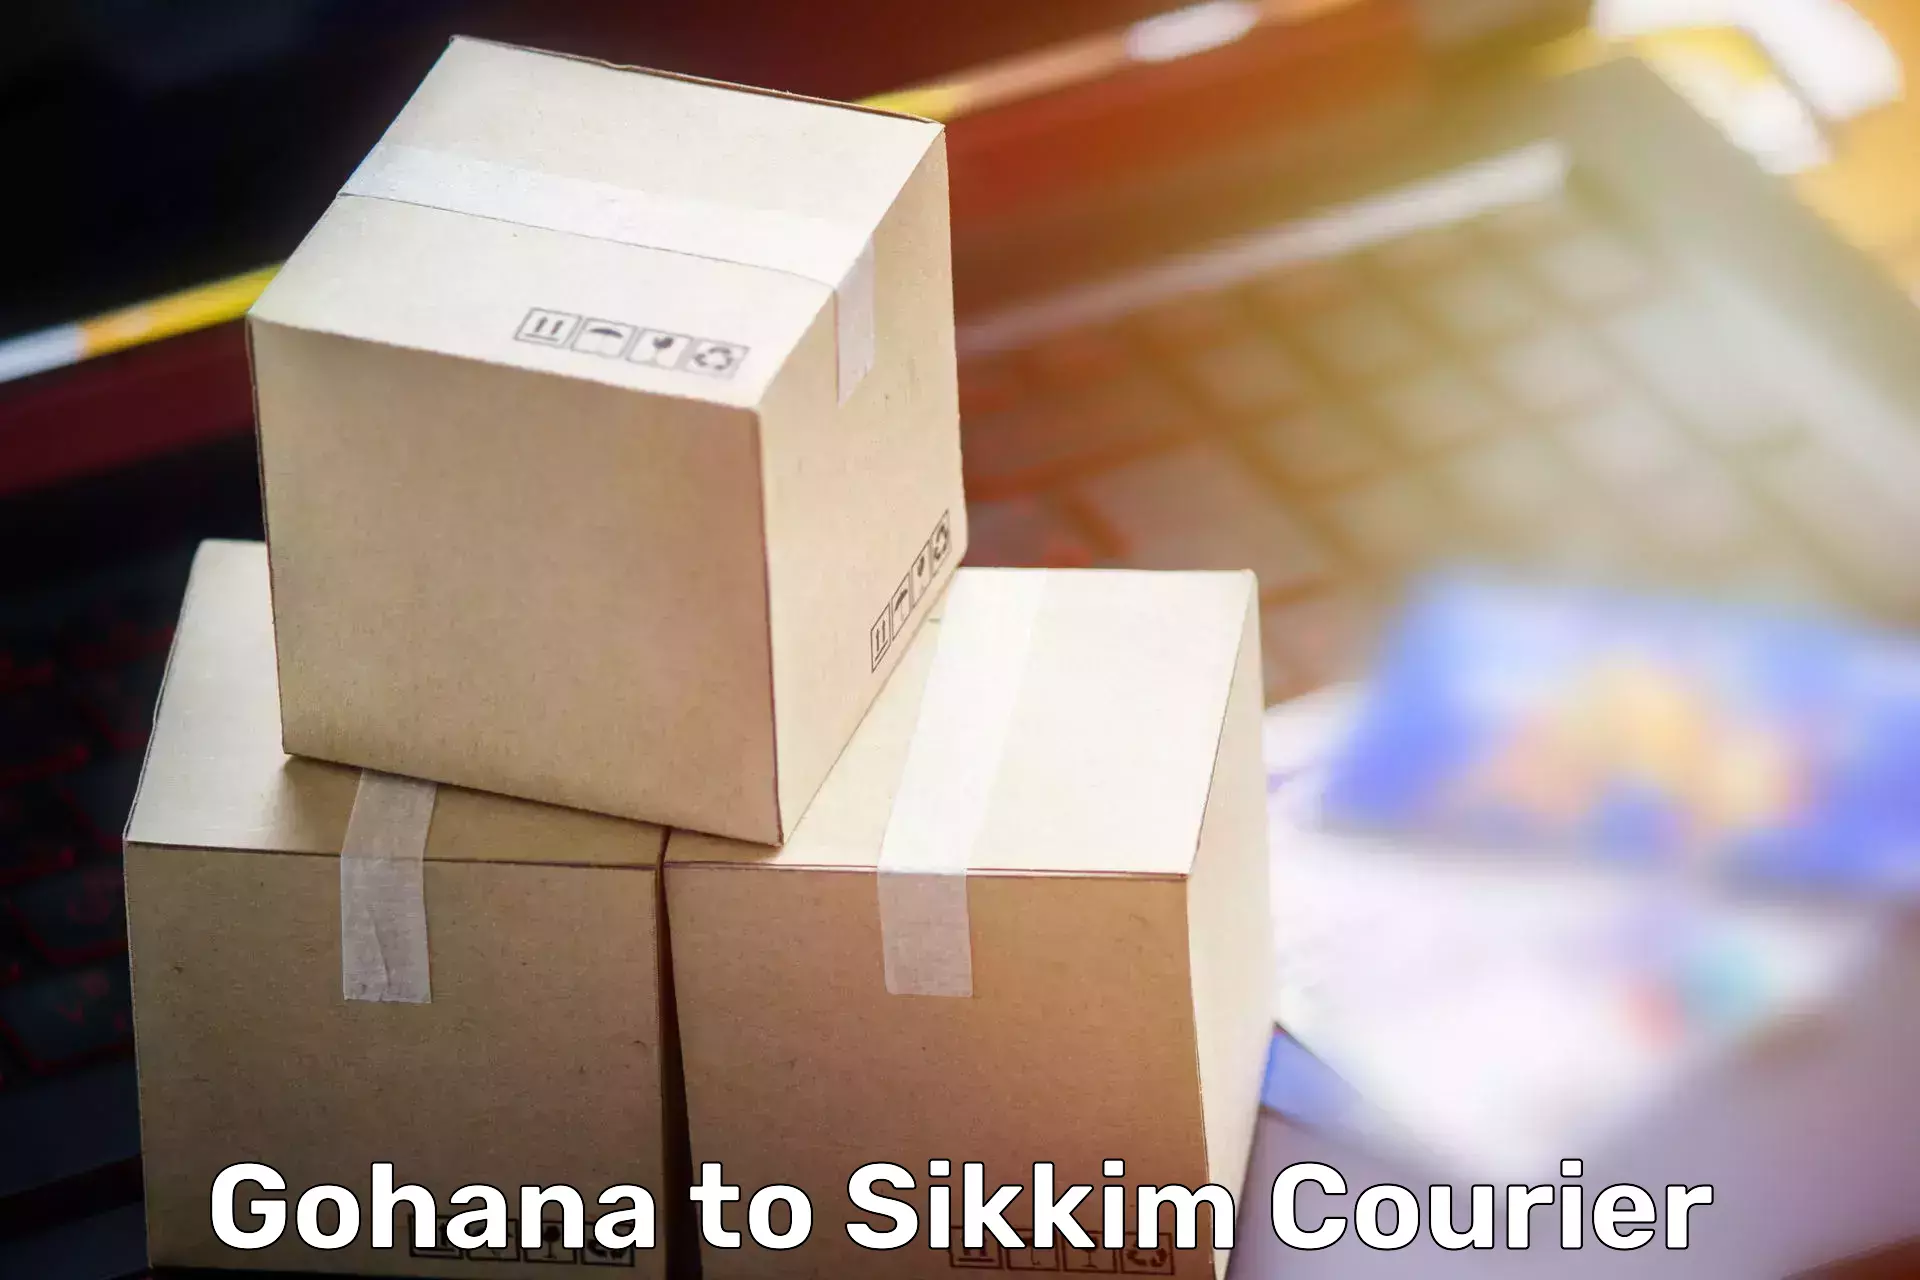 Skilled furniture movers Gohana to Pelling